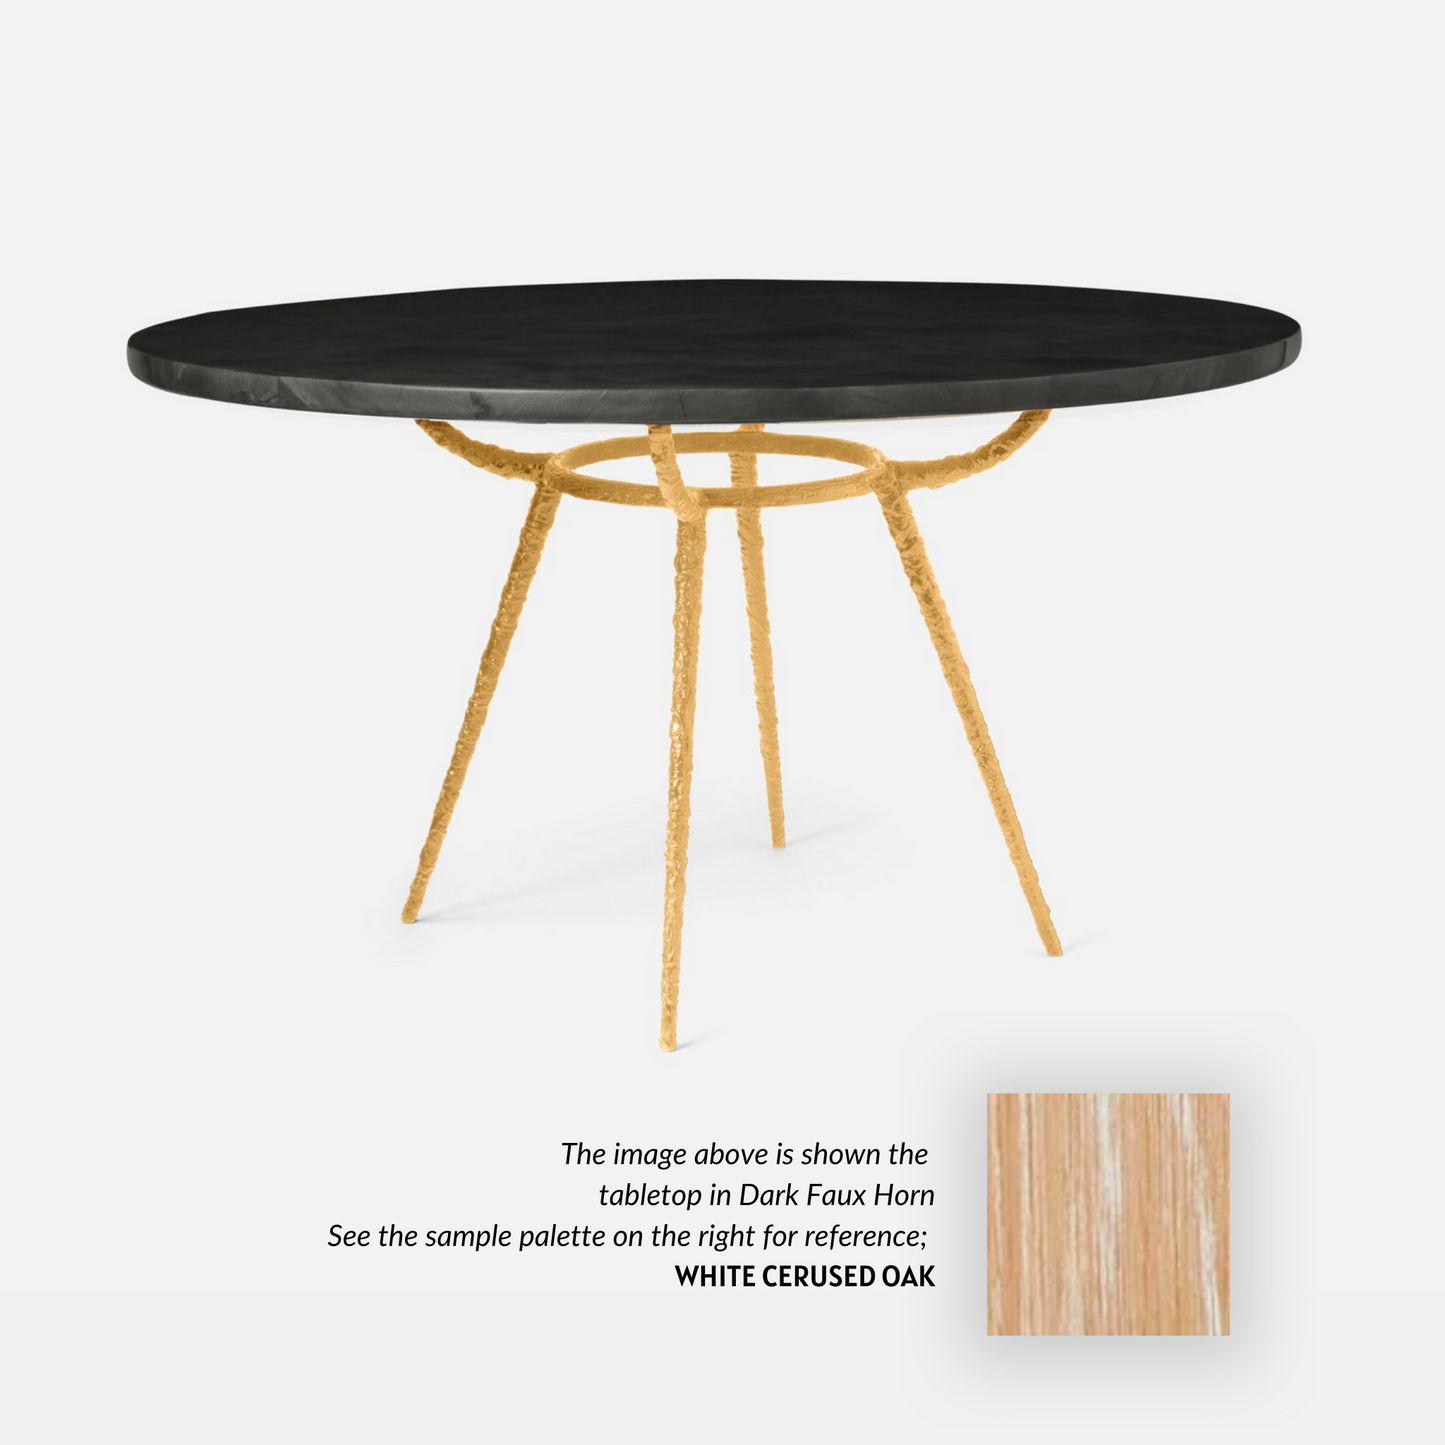 Made Goods Grace 60" x 30" Gold Pitted Iron Dinning Table With Round White Cerused Oak Table Top